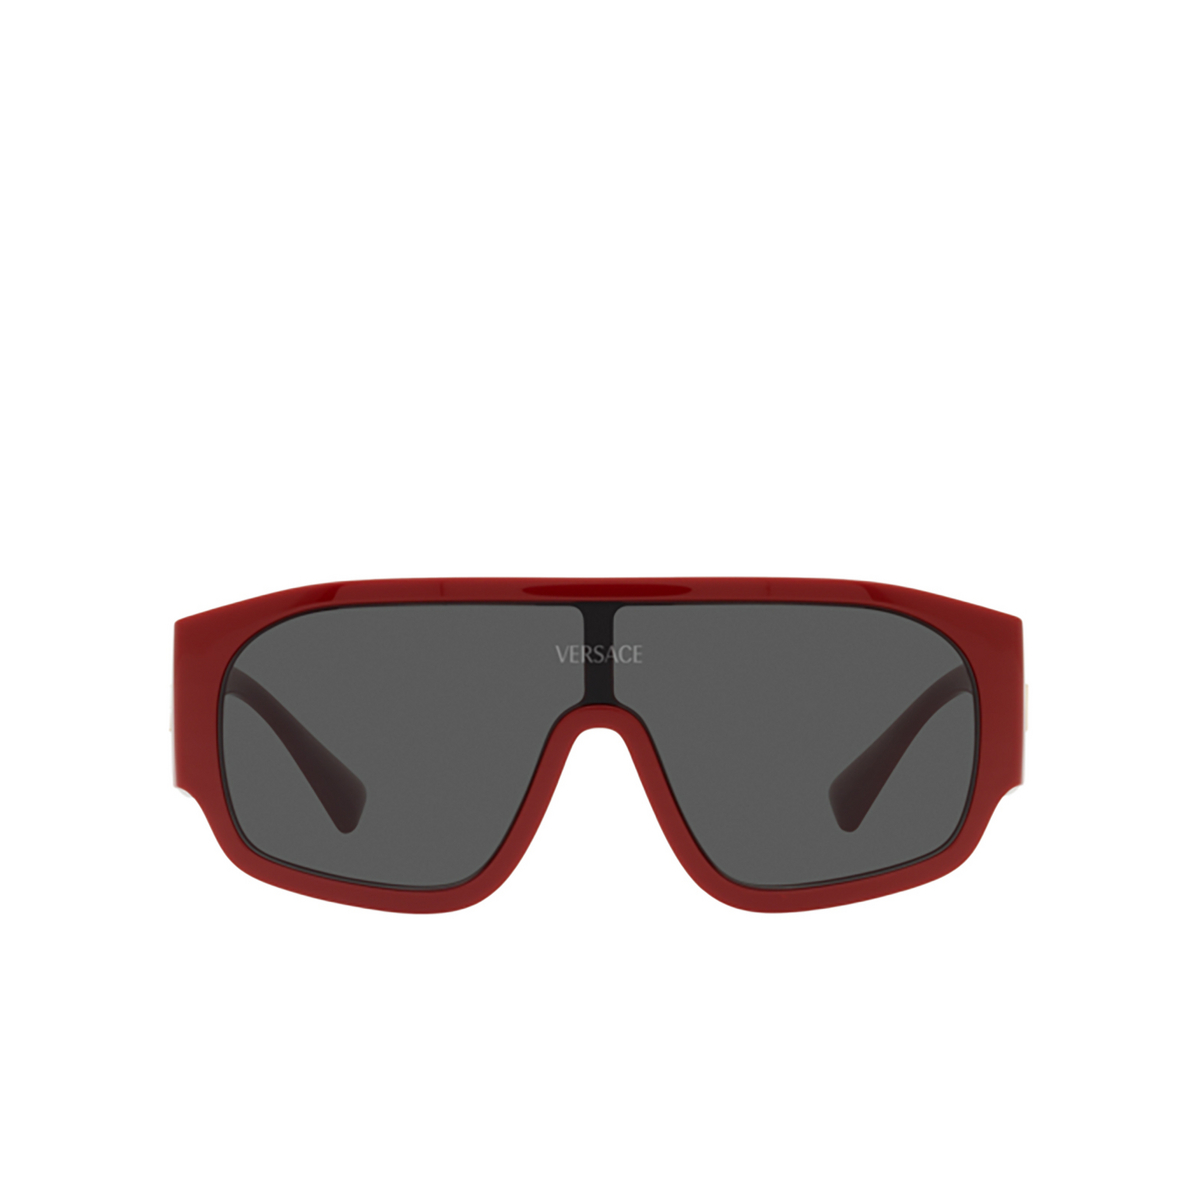 Versace VE4439 Sunglasses 538887 Red - front view